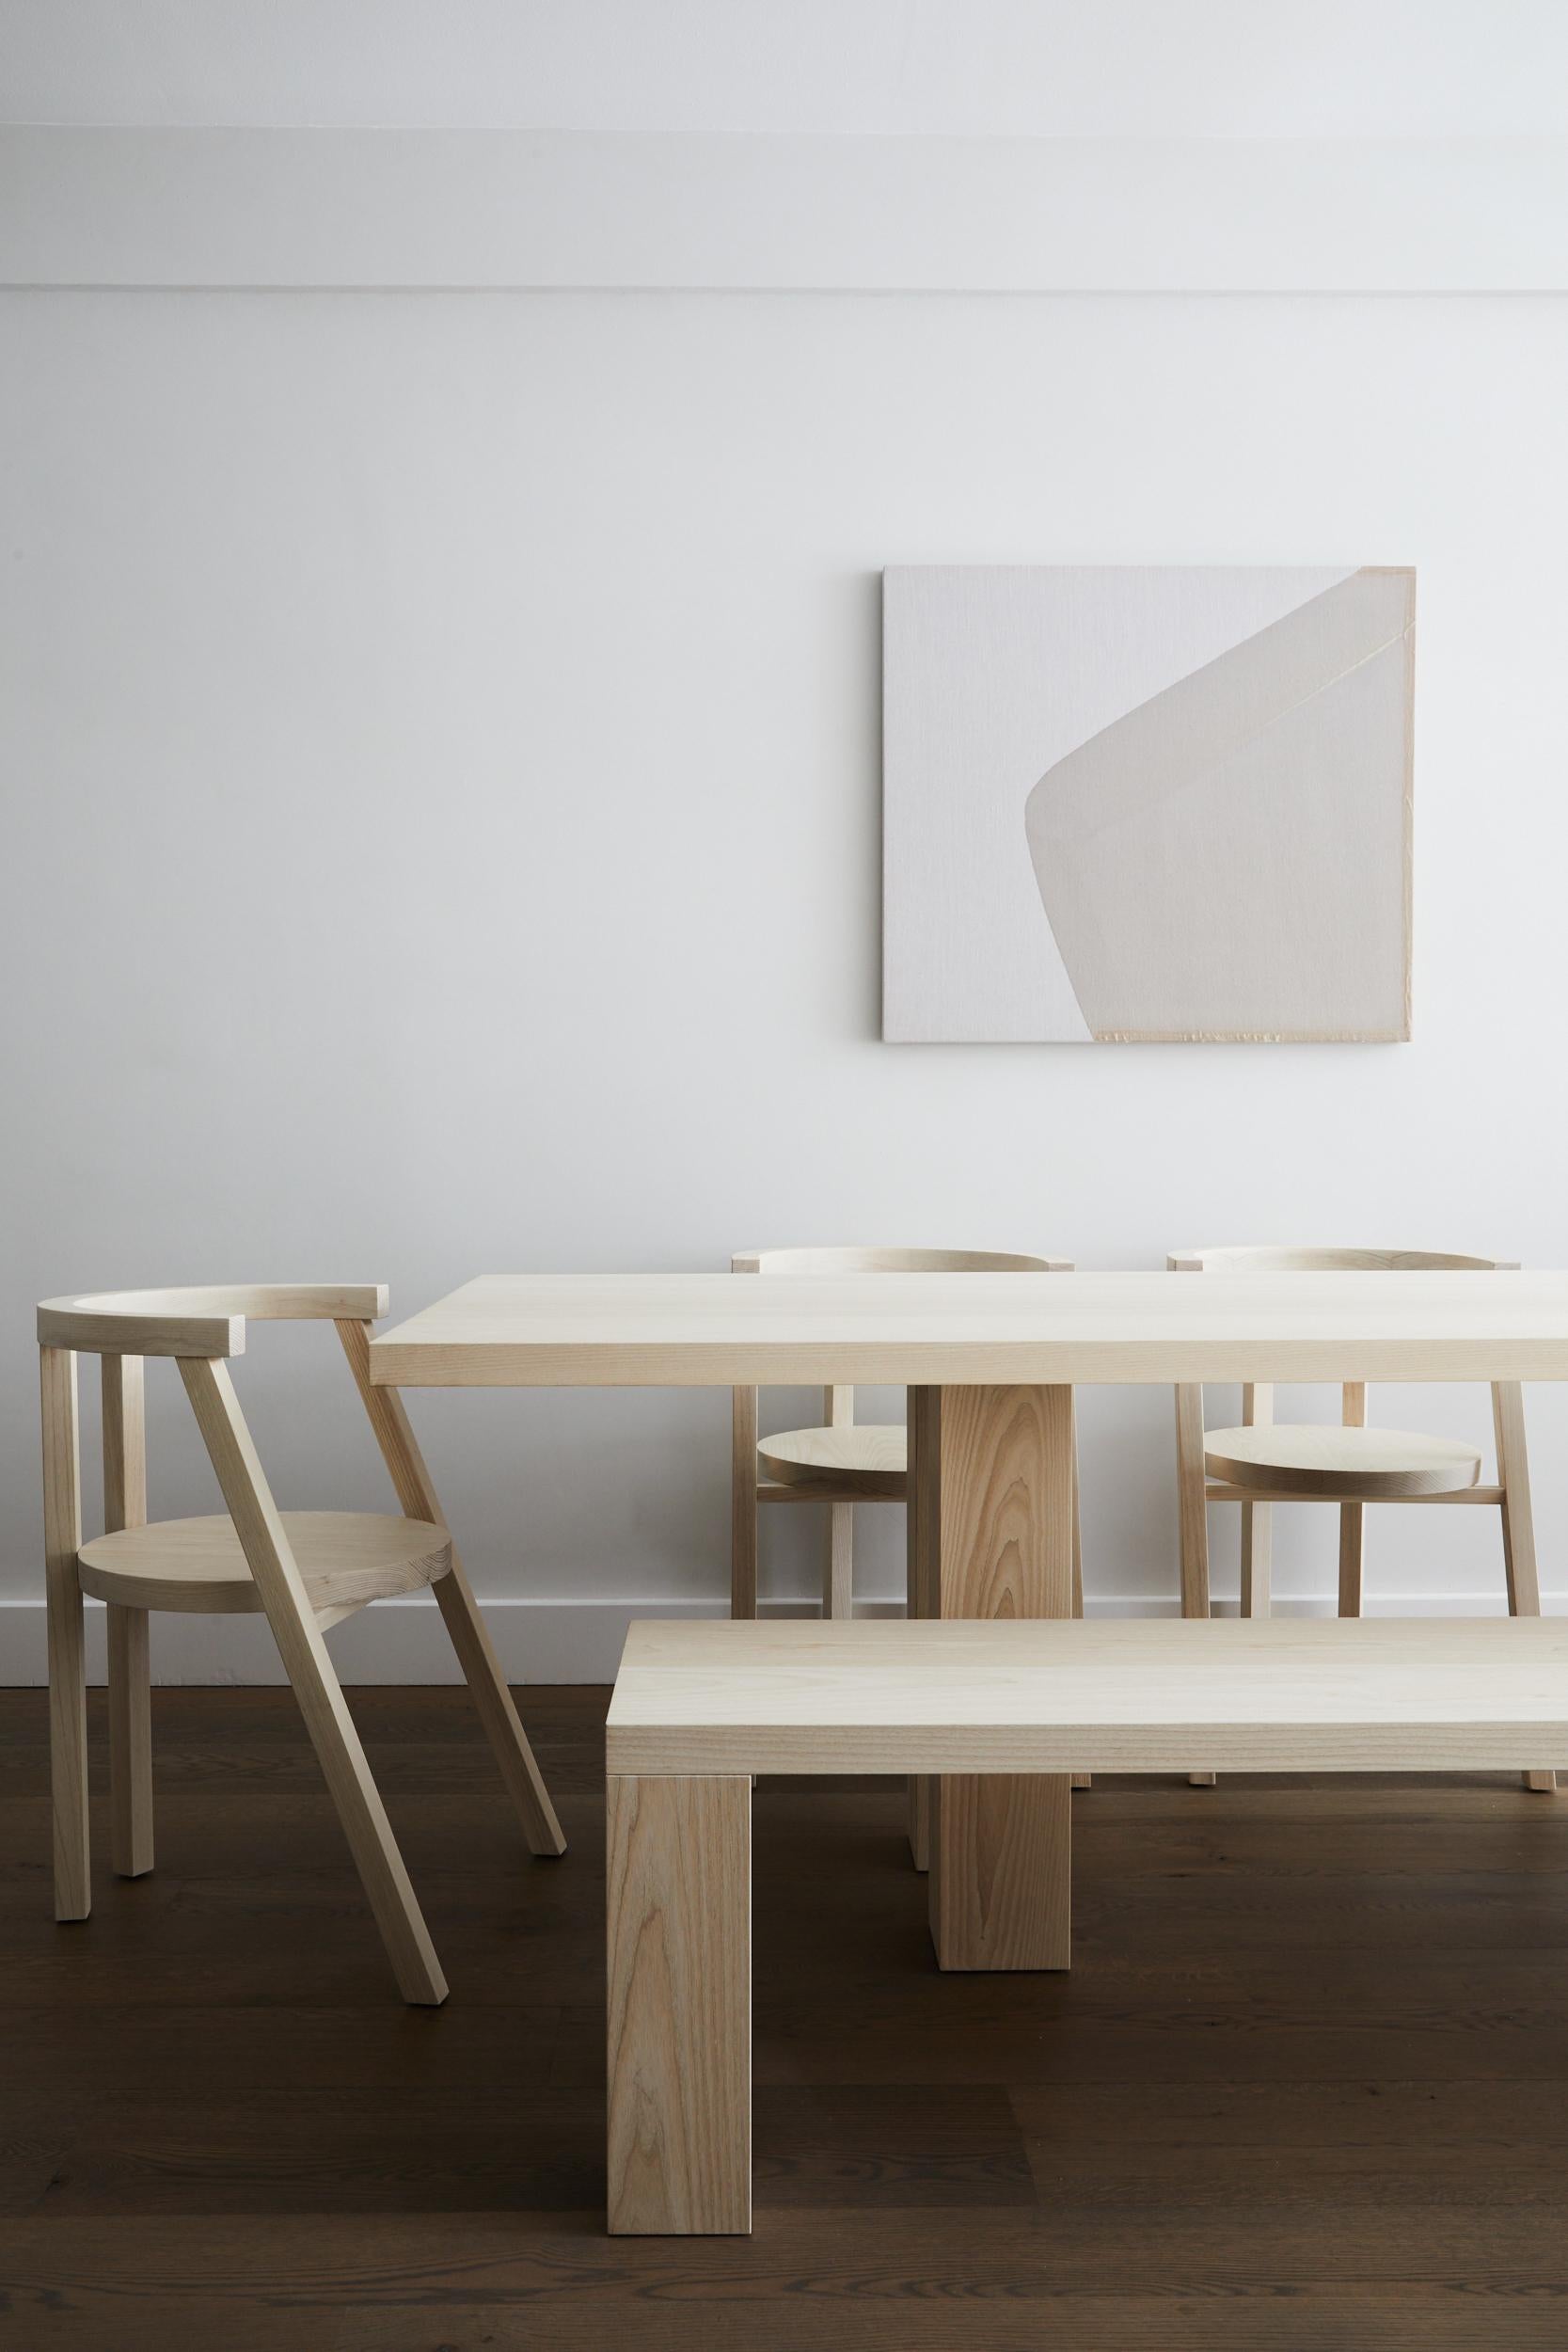 This piece quietly challenges the archetype of a bench with the unexpected proportion of the legs and hidden detailing. A single plane effortlessly floats across the legs. A continuation of the Nº 101 Dining Table.

Beautifully crafted with high